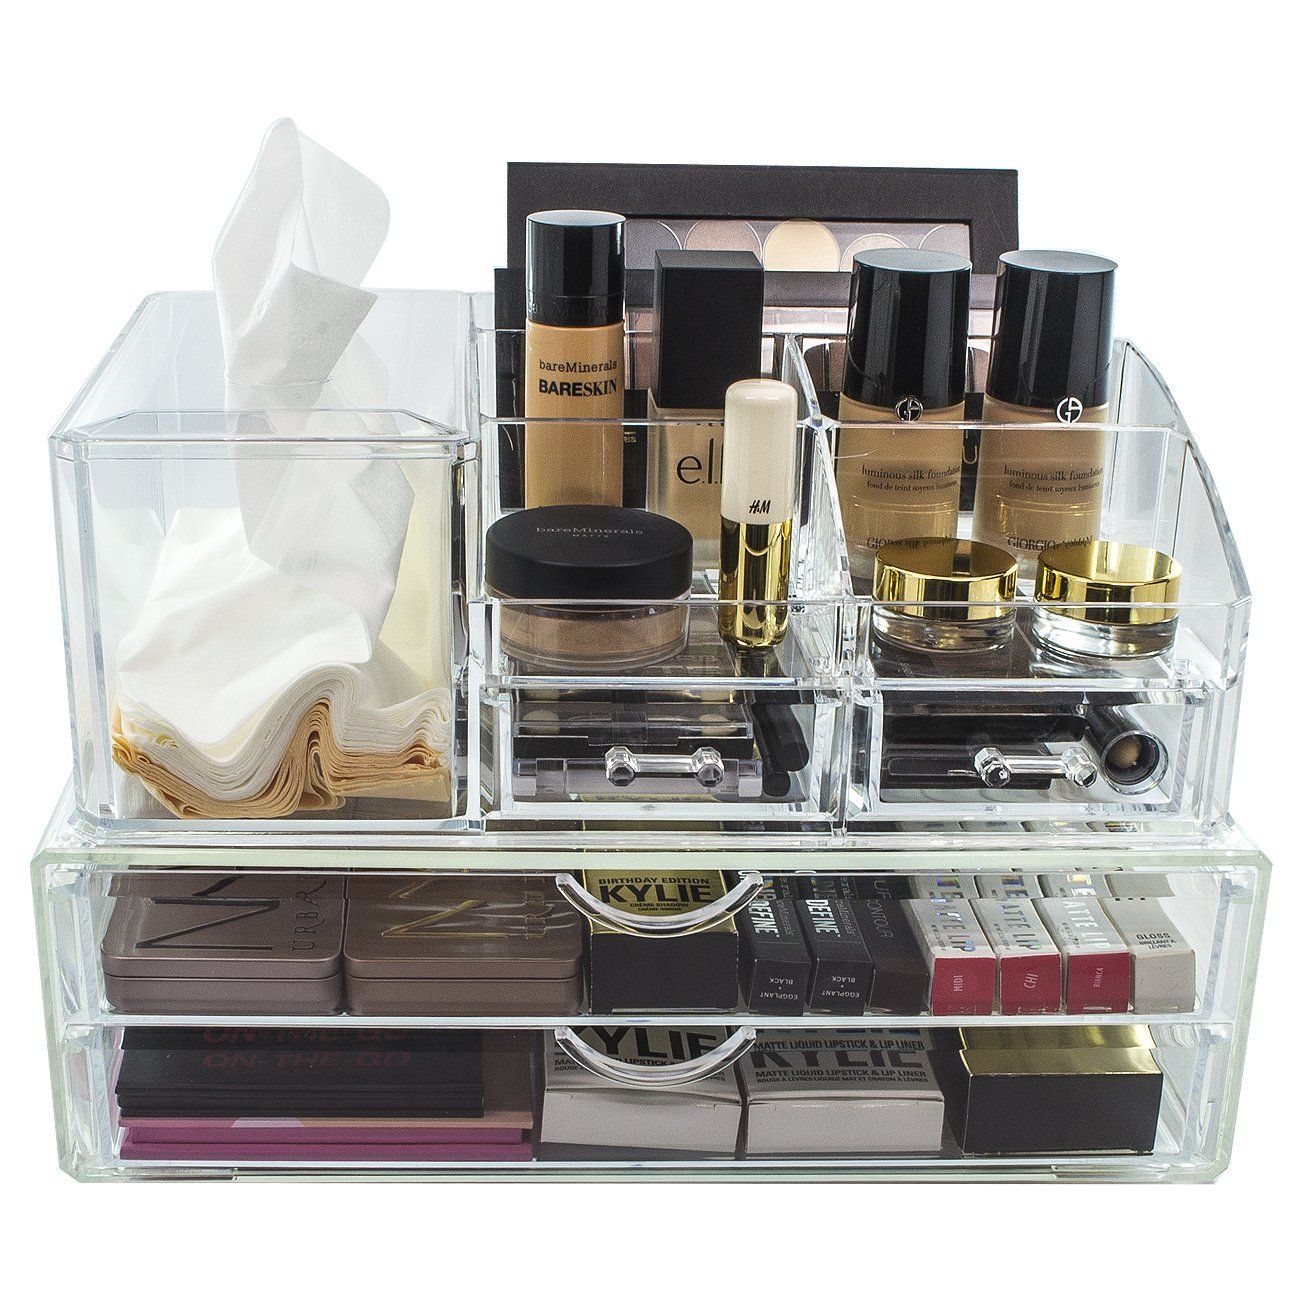 Makeup Organizer with Tissue Holder - sorbusbeauty